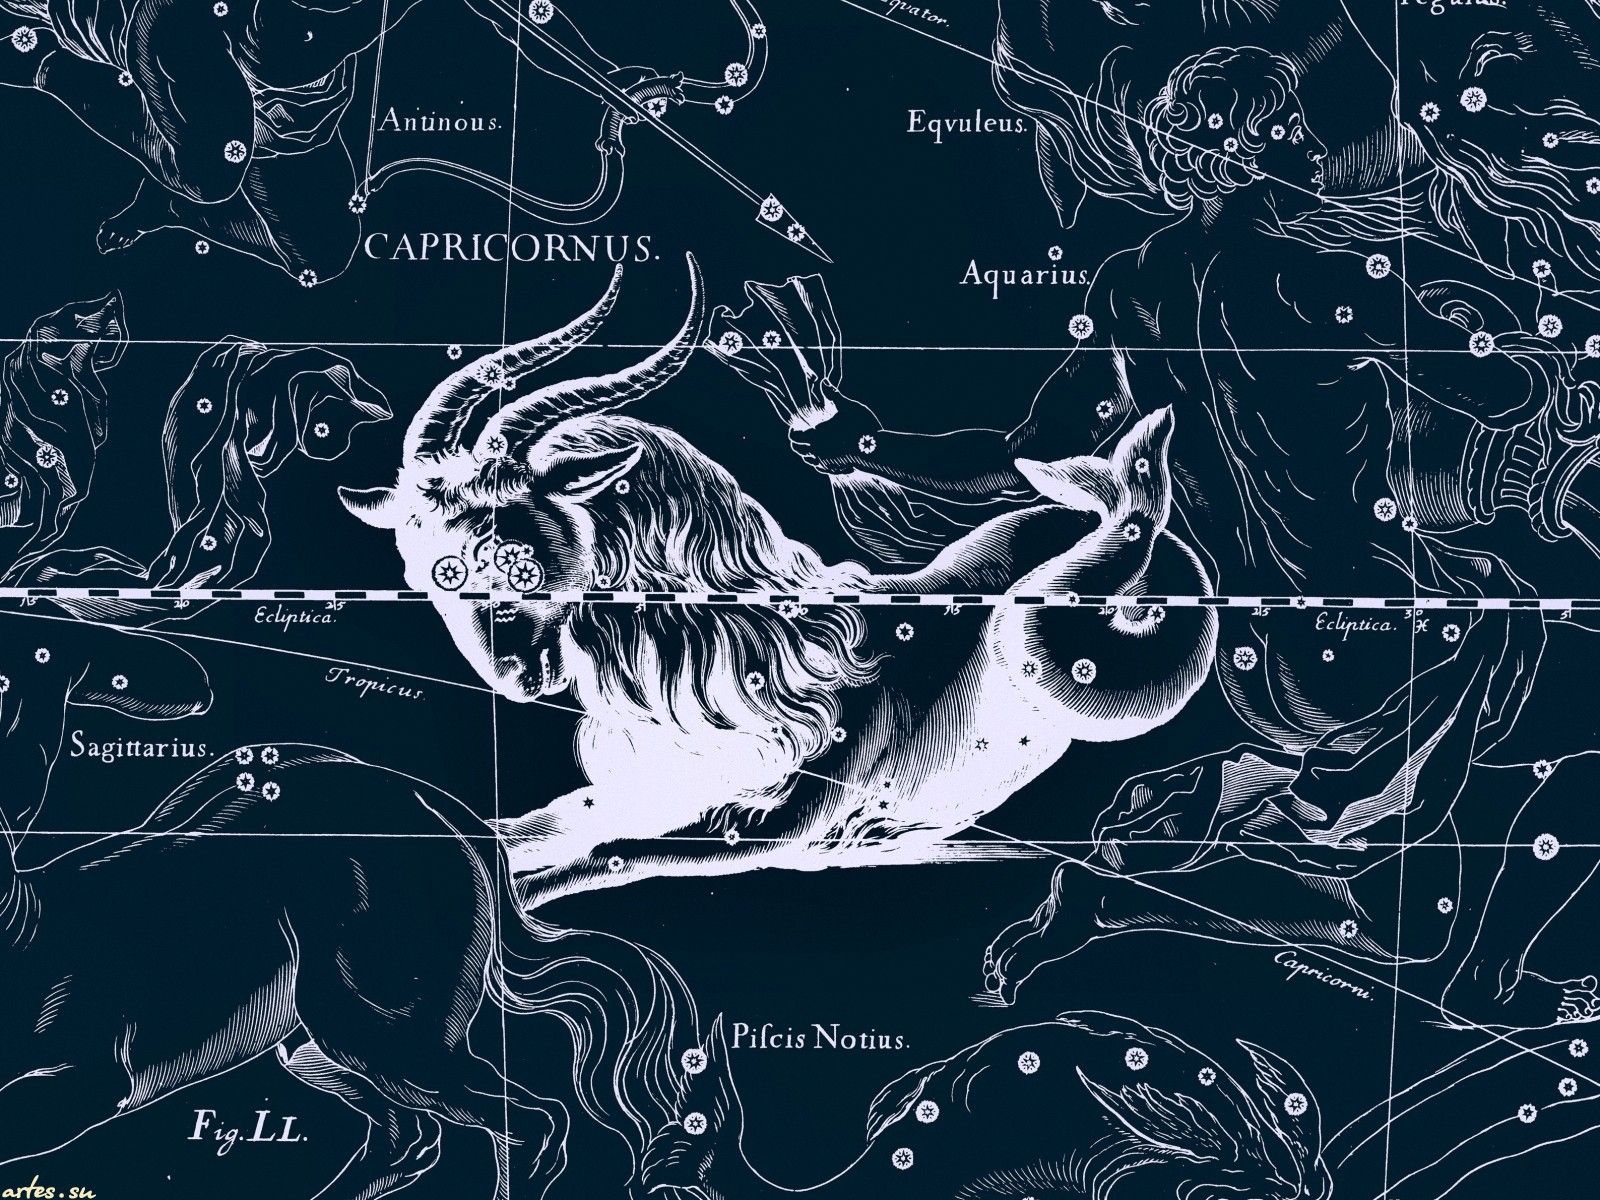 The stars of the zodiacs are marked on the map - Capricorn